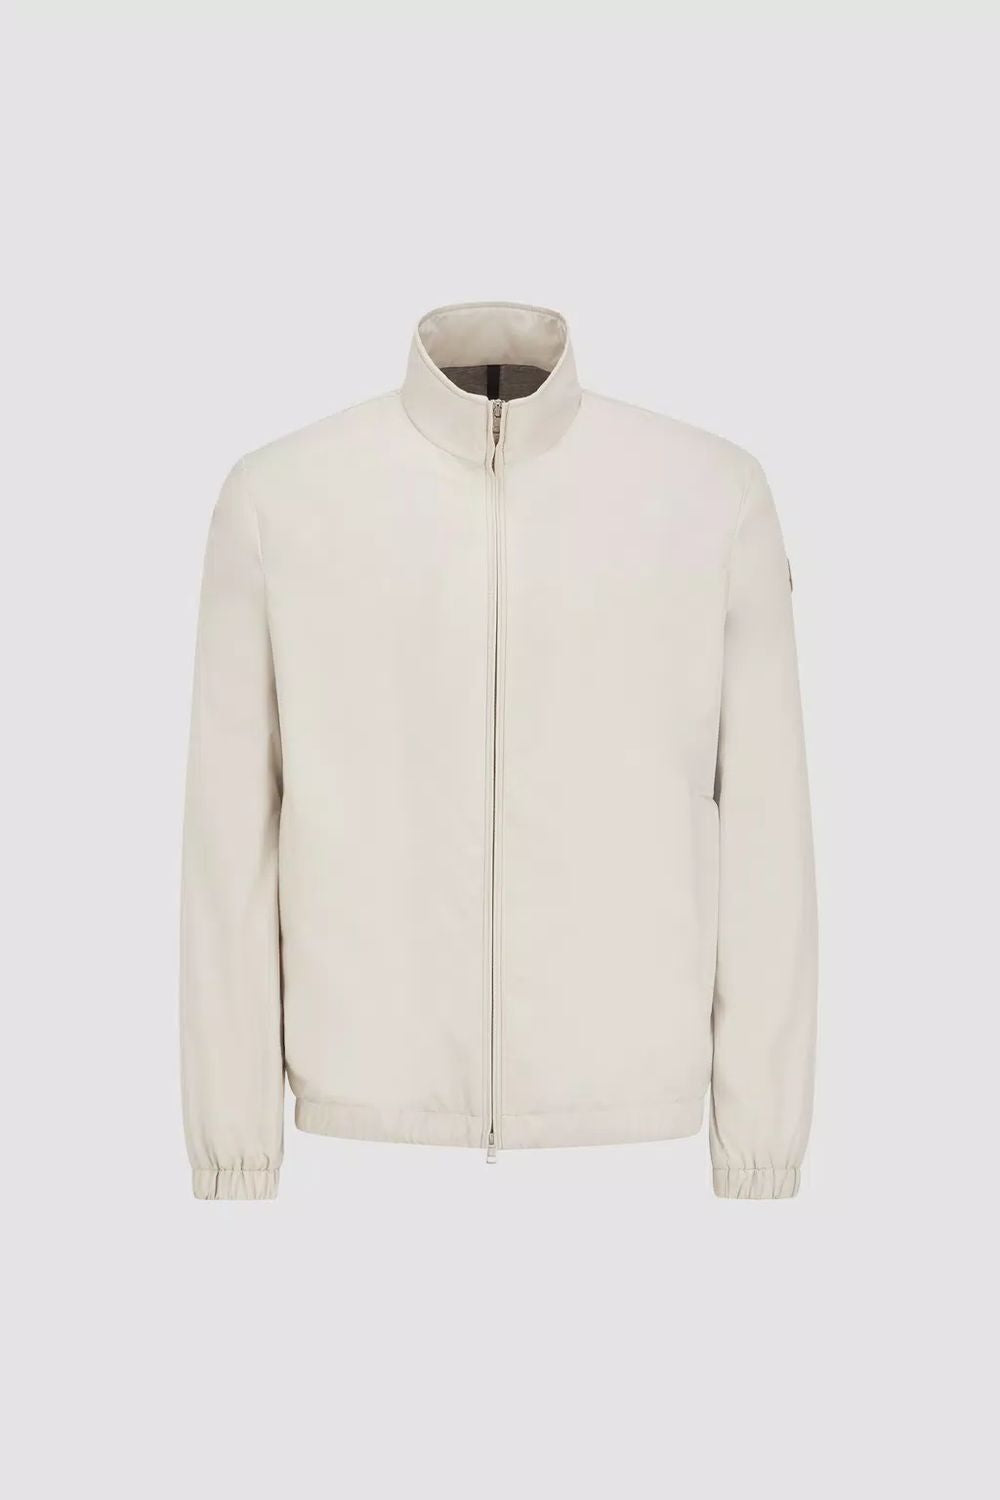 MONCLER Men's SS24 Light Grey Polyester Jacket for Outdoor Adventures